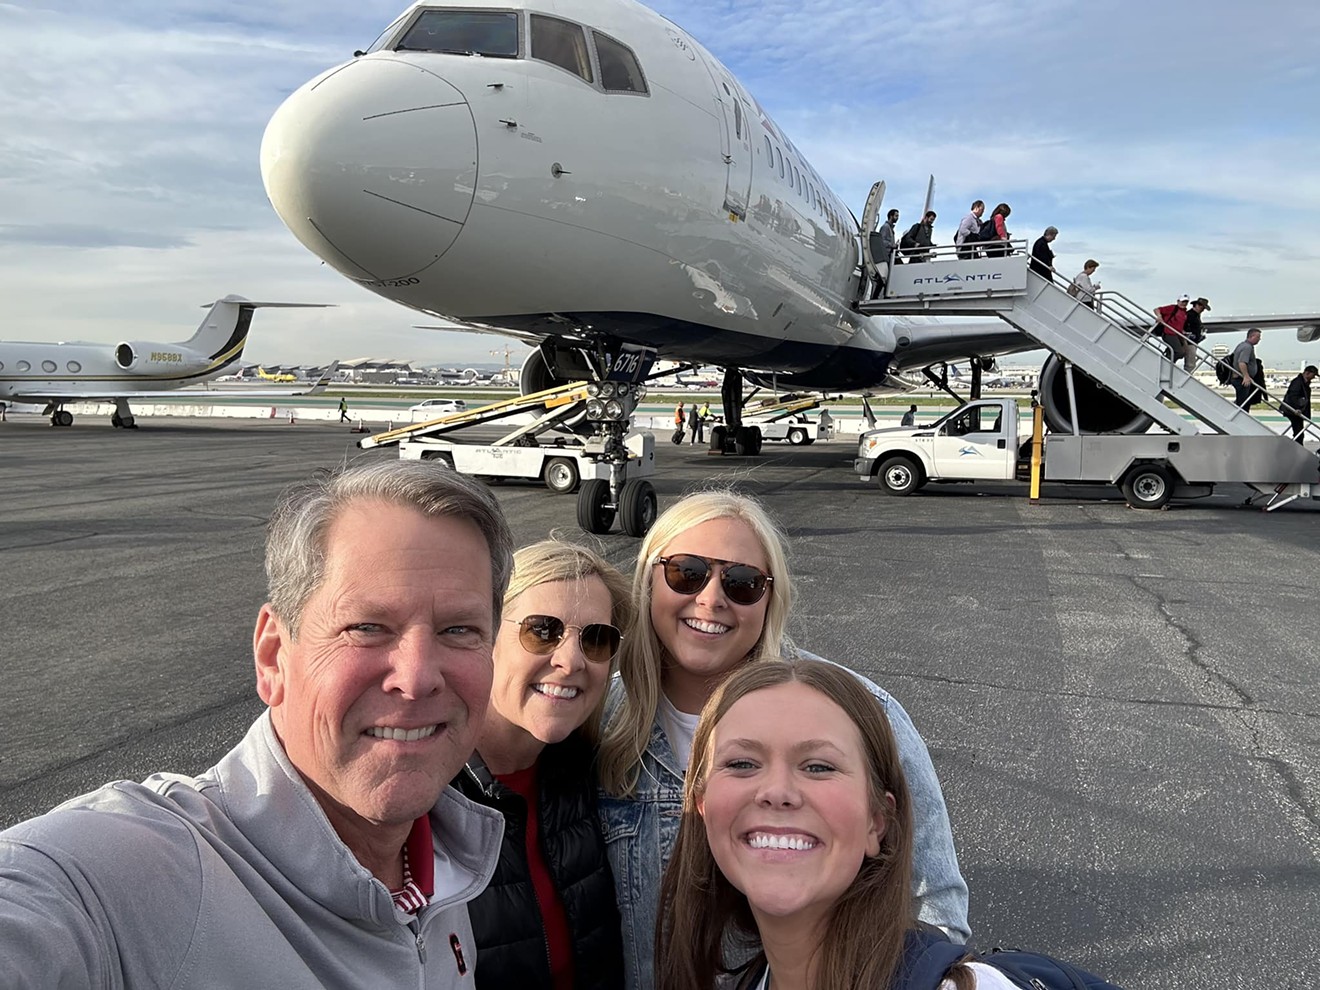 Brian Kemp posted this photo to his Facebook page with the caption "Marty, the girls, and I just landed in California for the #NationalChampionship. First thing we’re going to do is find a spot to tailgate with the best fans in the country!"